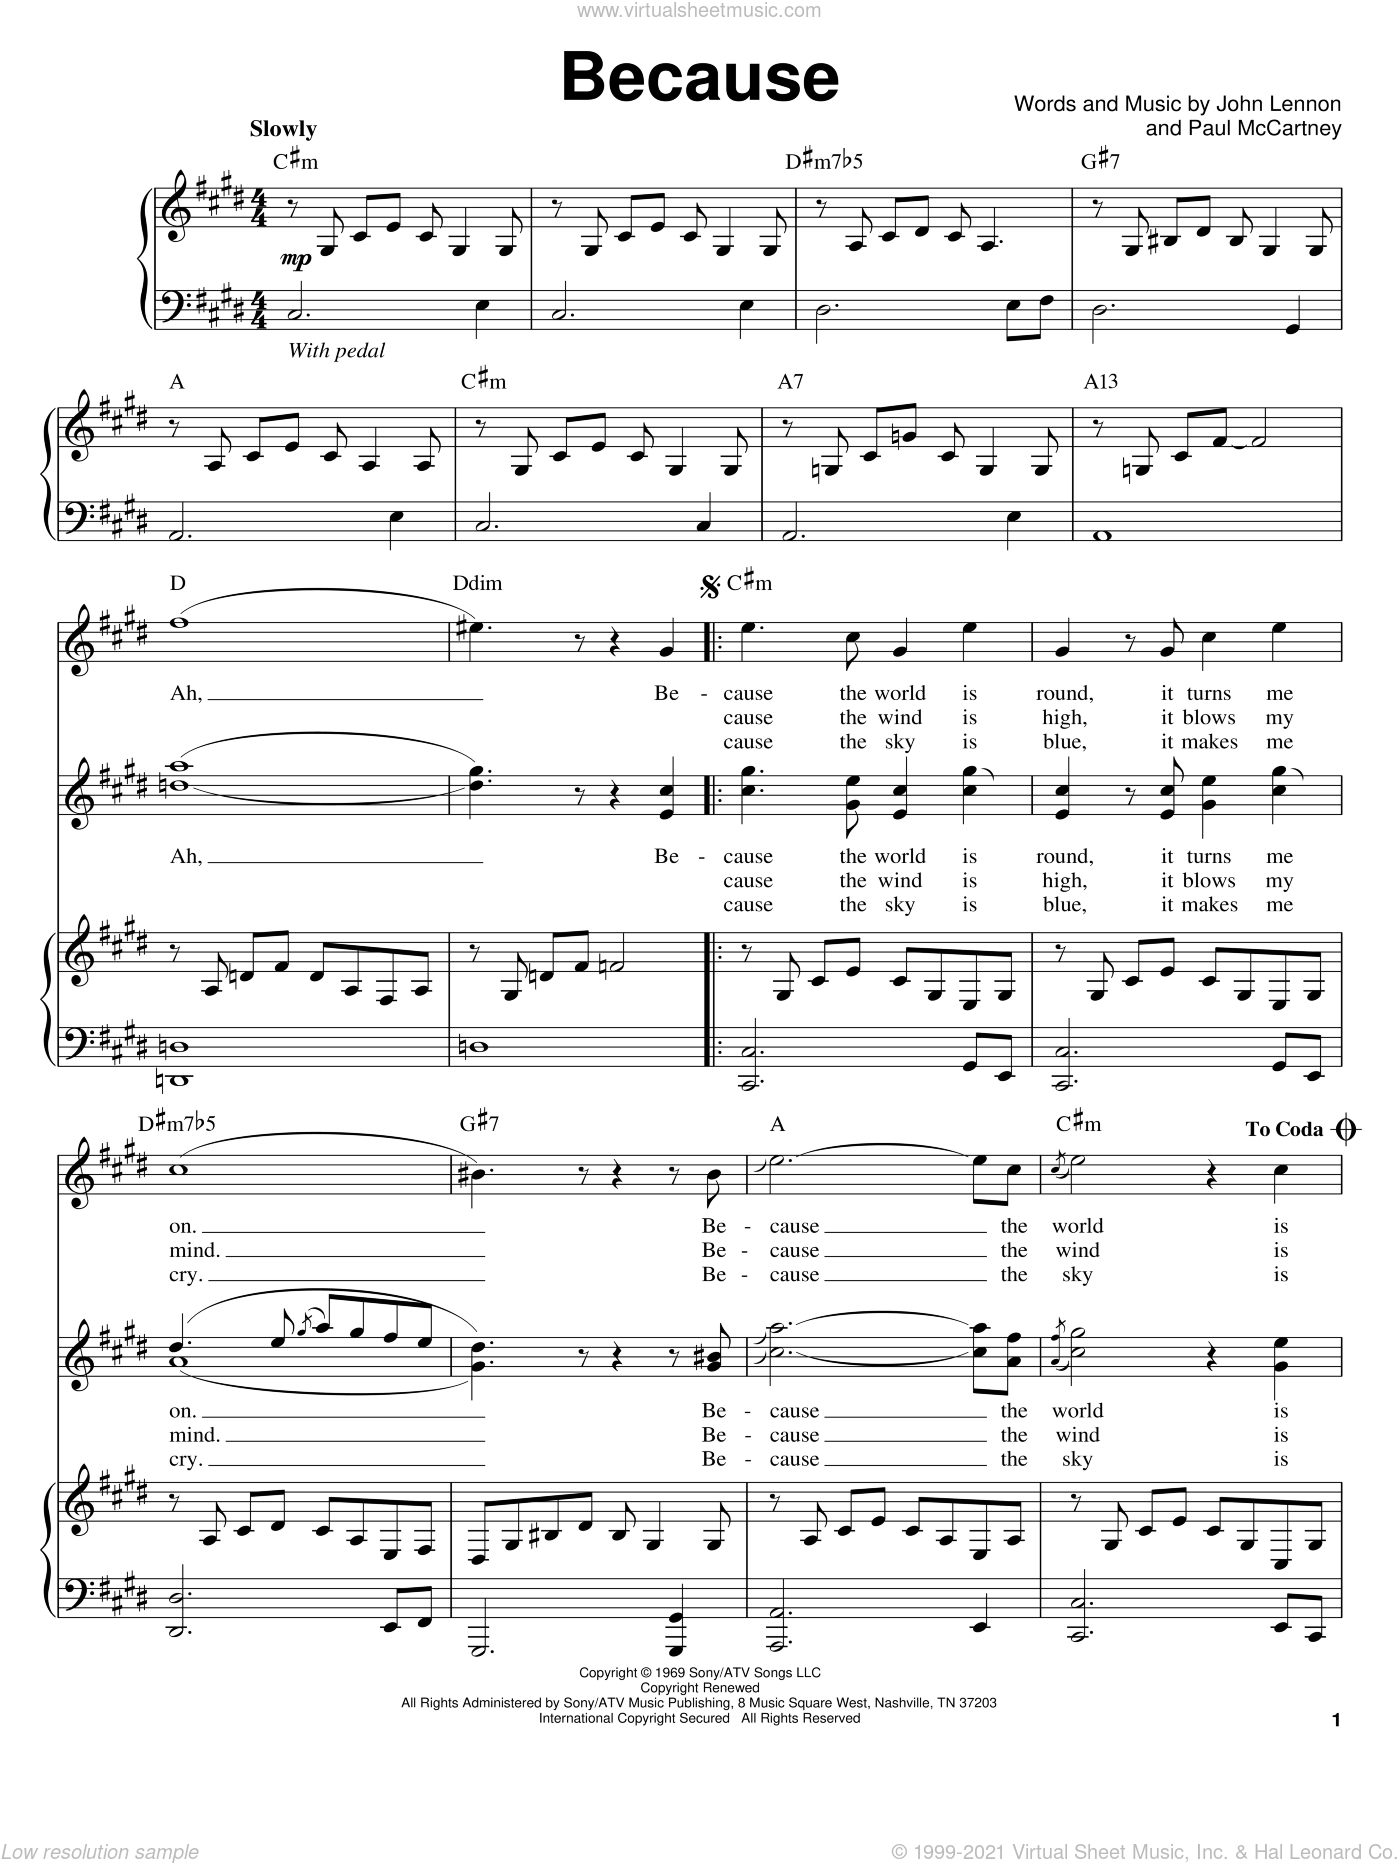 Beatles - Because sheet music for voice and piano [PDF]